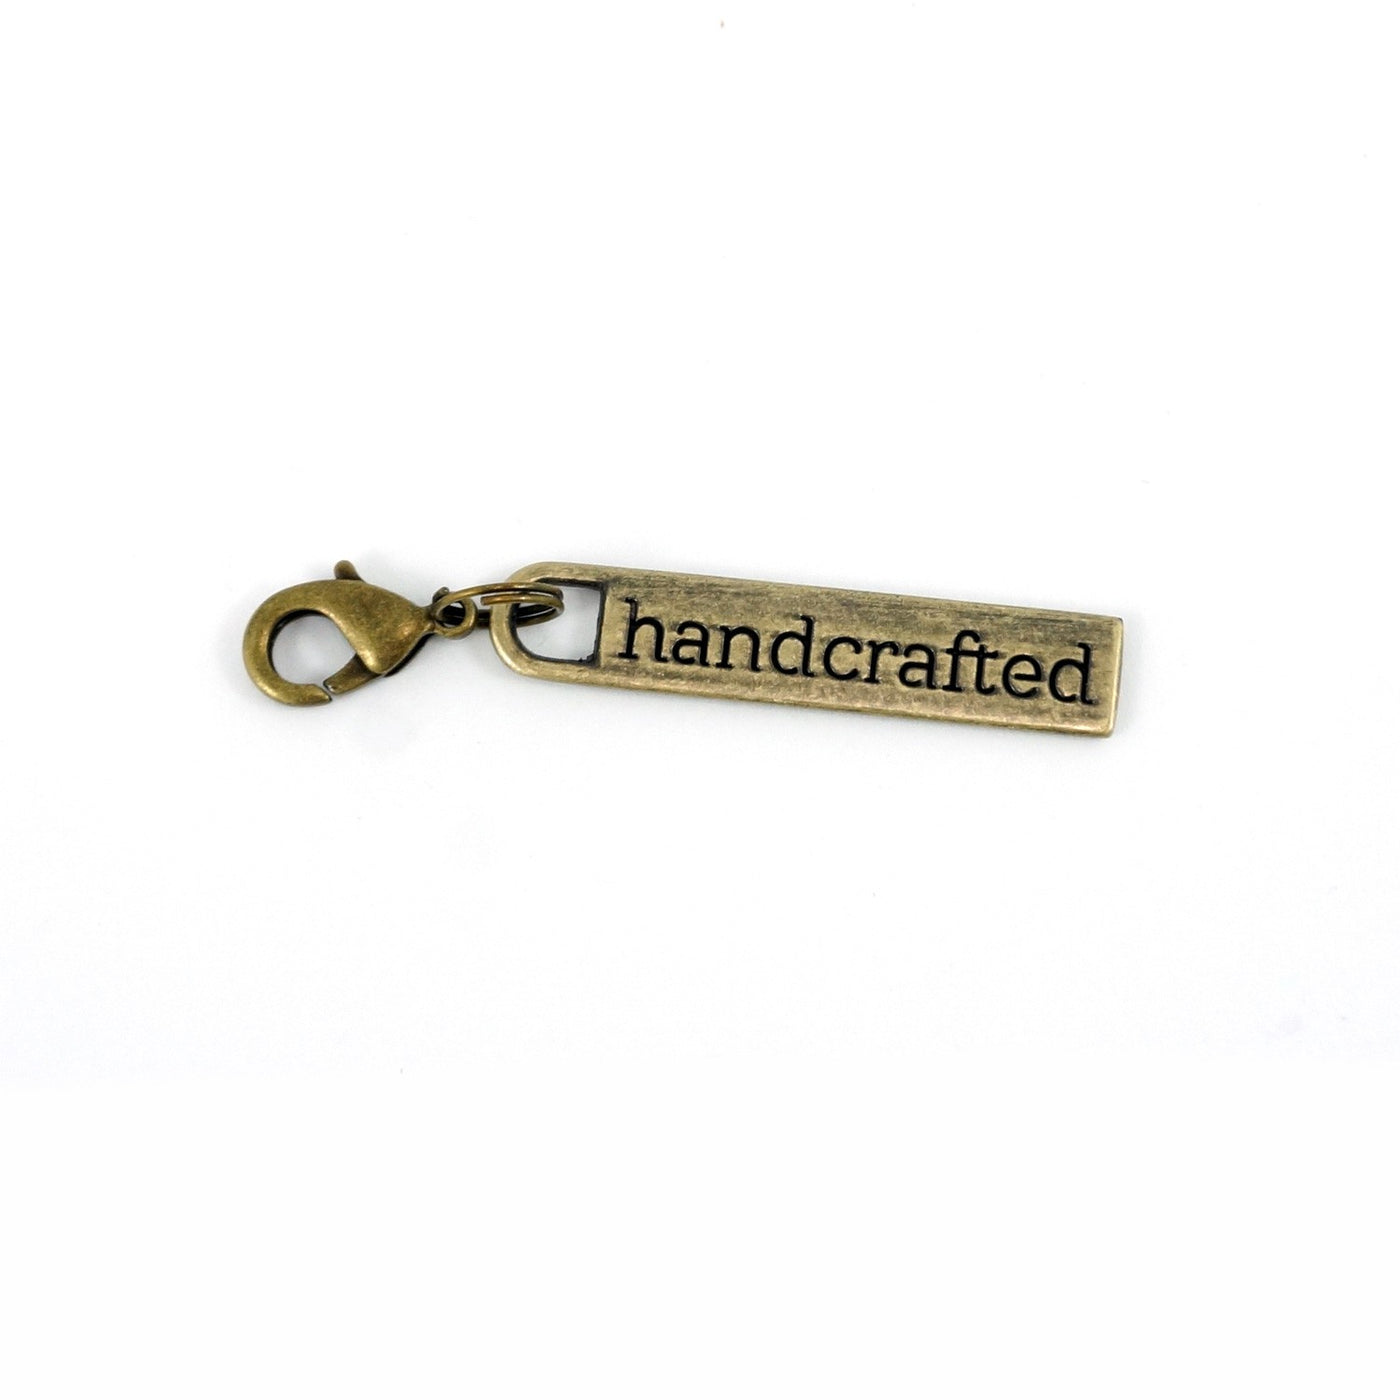 One Zipper Pull Hook "Handcrafted"